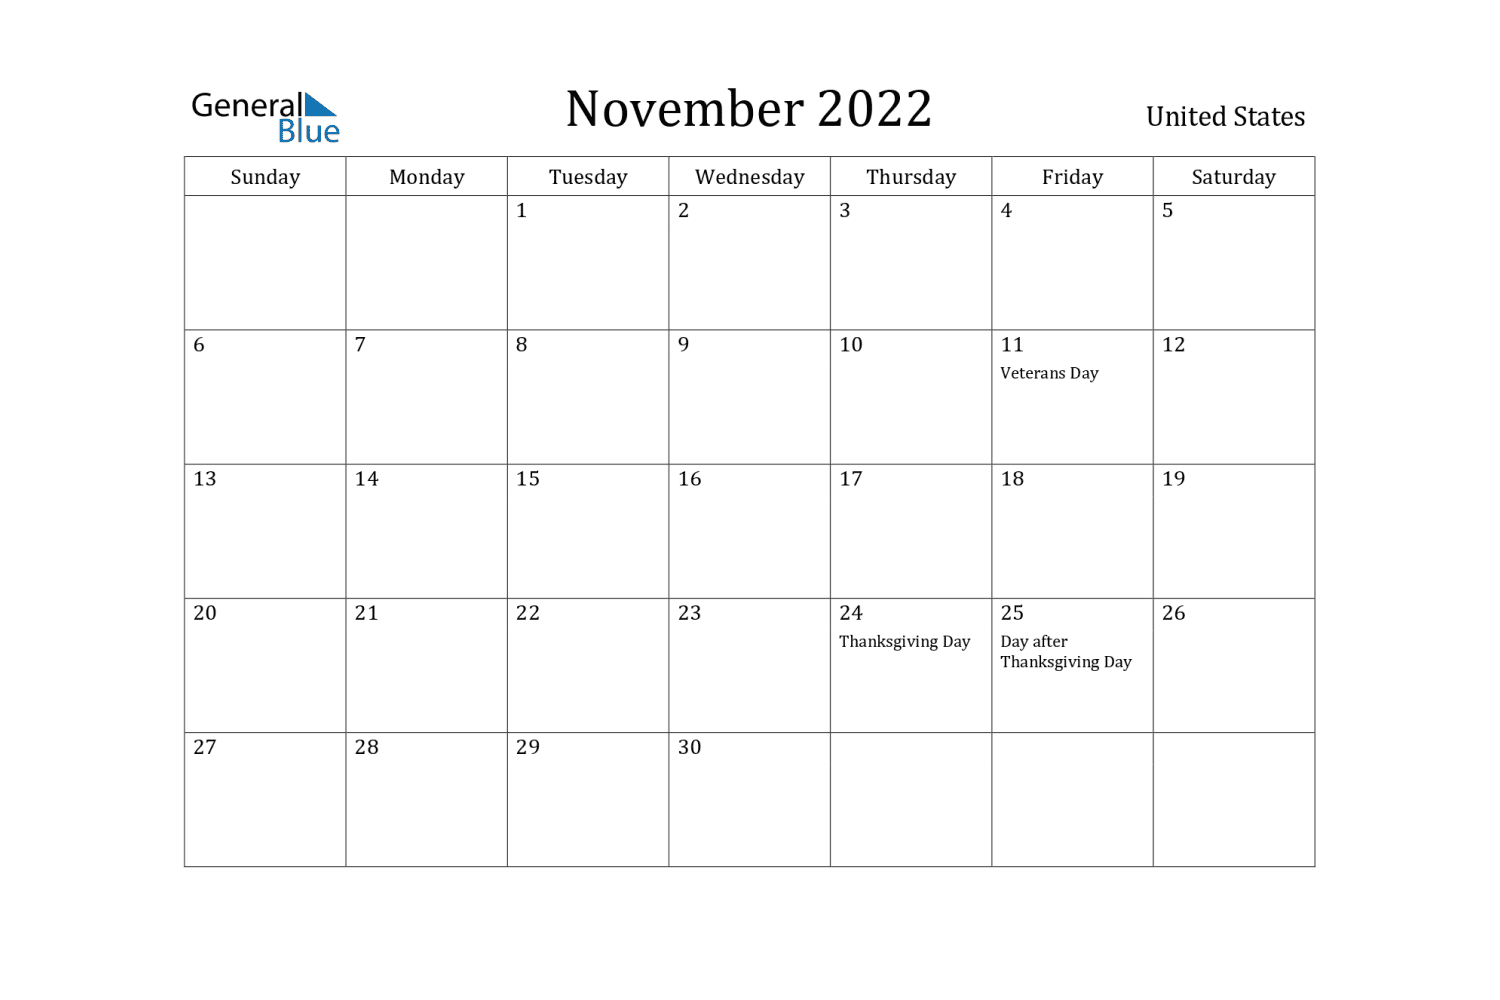 November calendar with holidays in date cells.